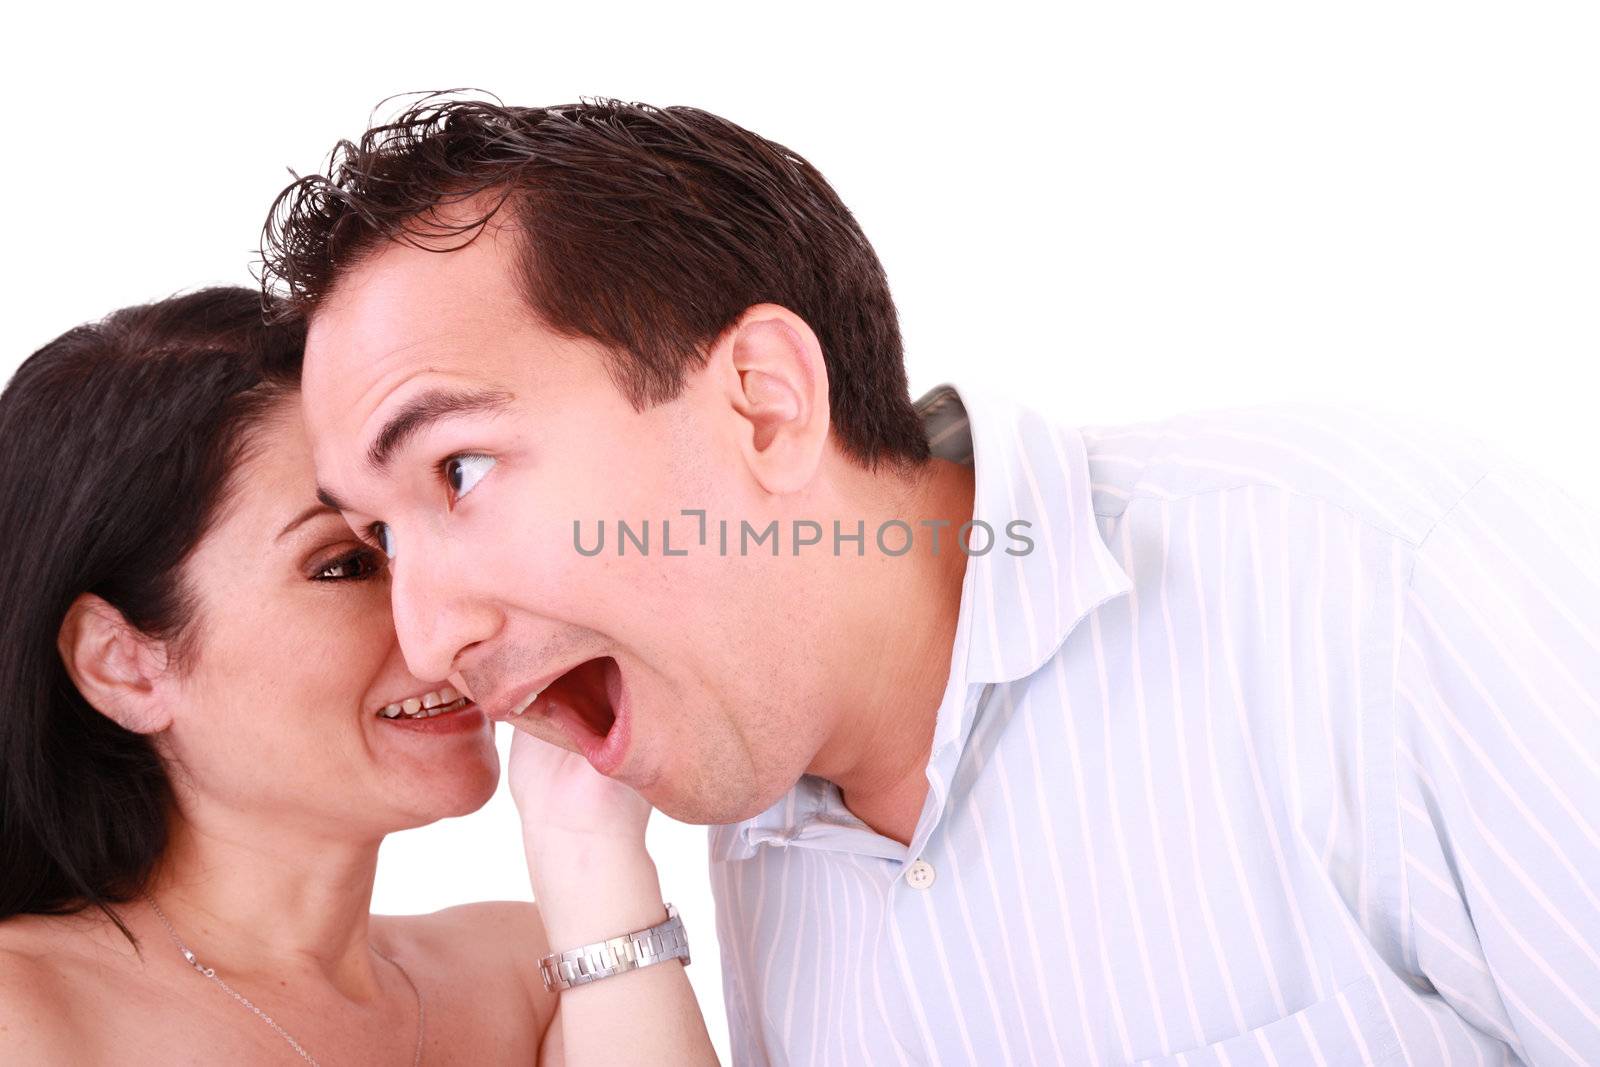 girl tells something into surprised guy's ear isolated on white background